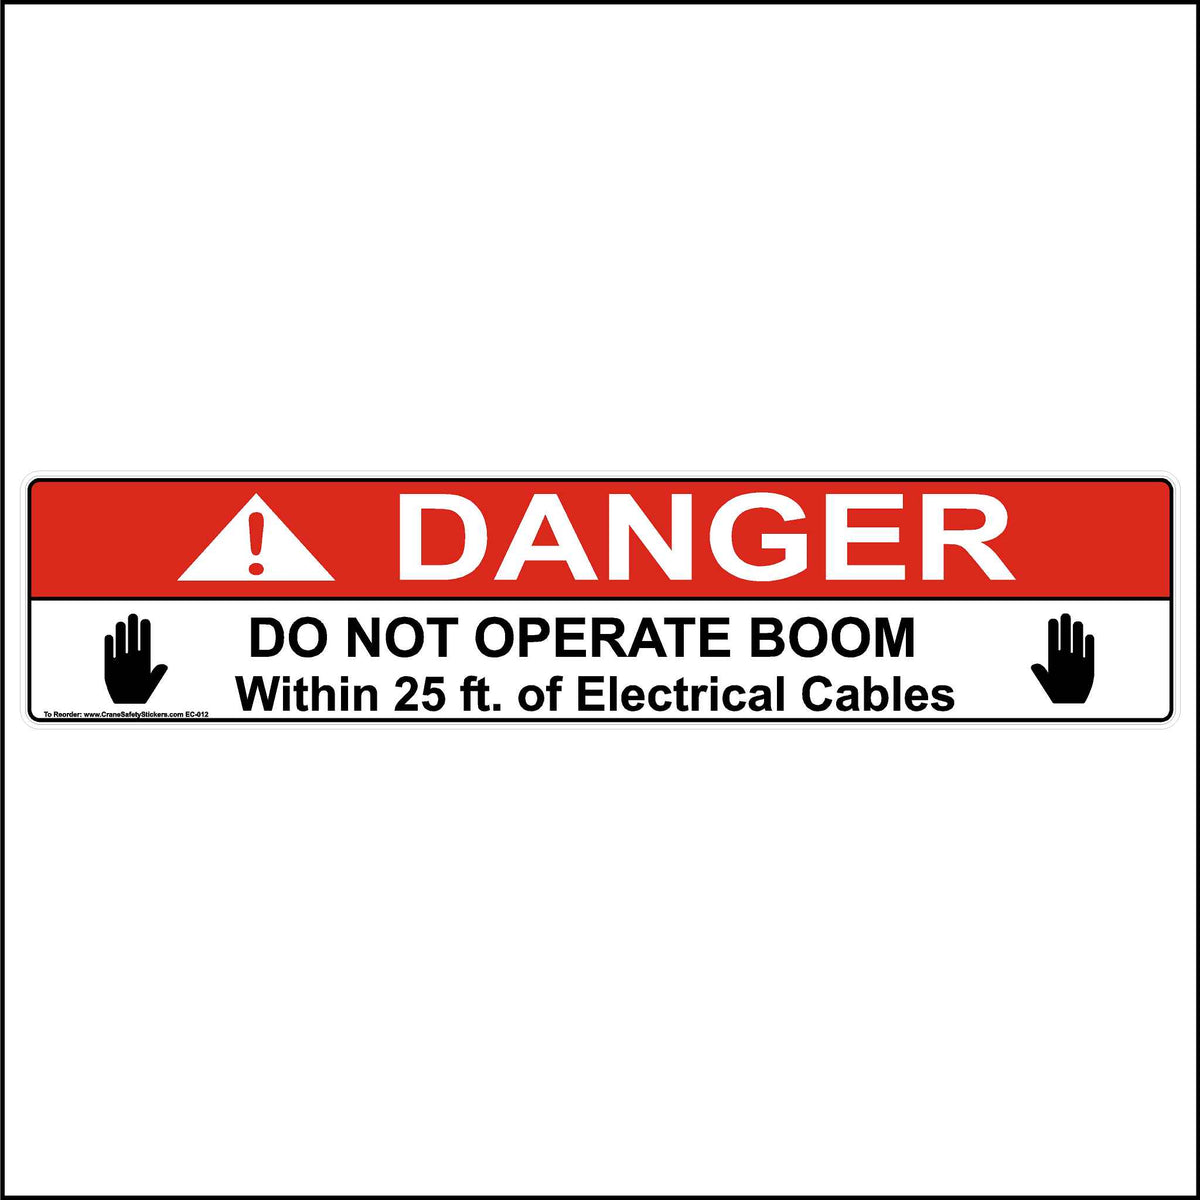 Safety Sticker printed with danger do not operate boom within 25 ft of electrical cables.